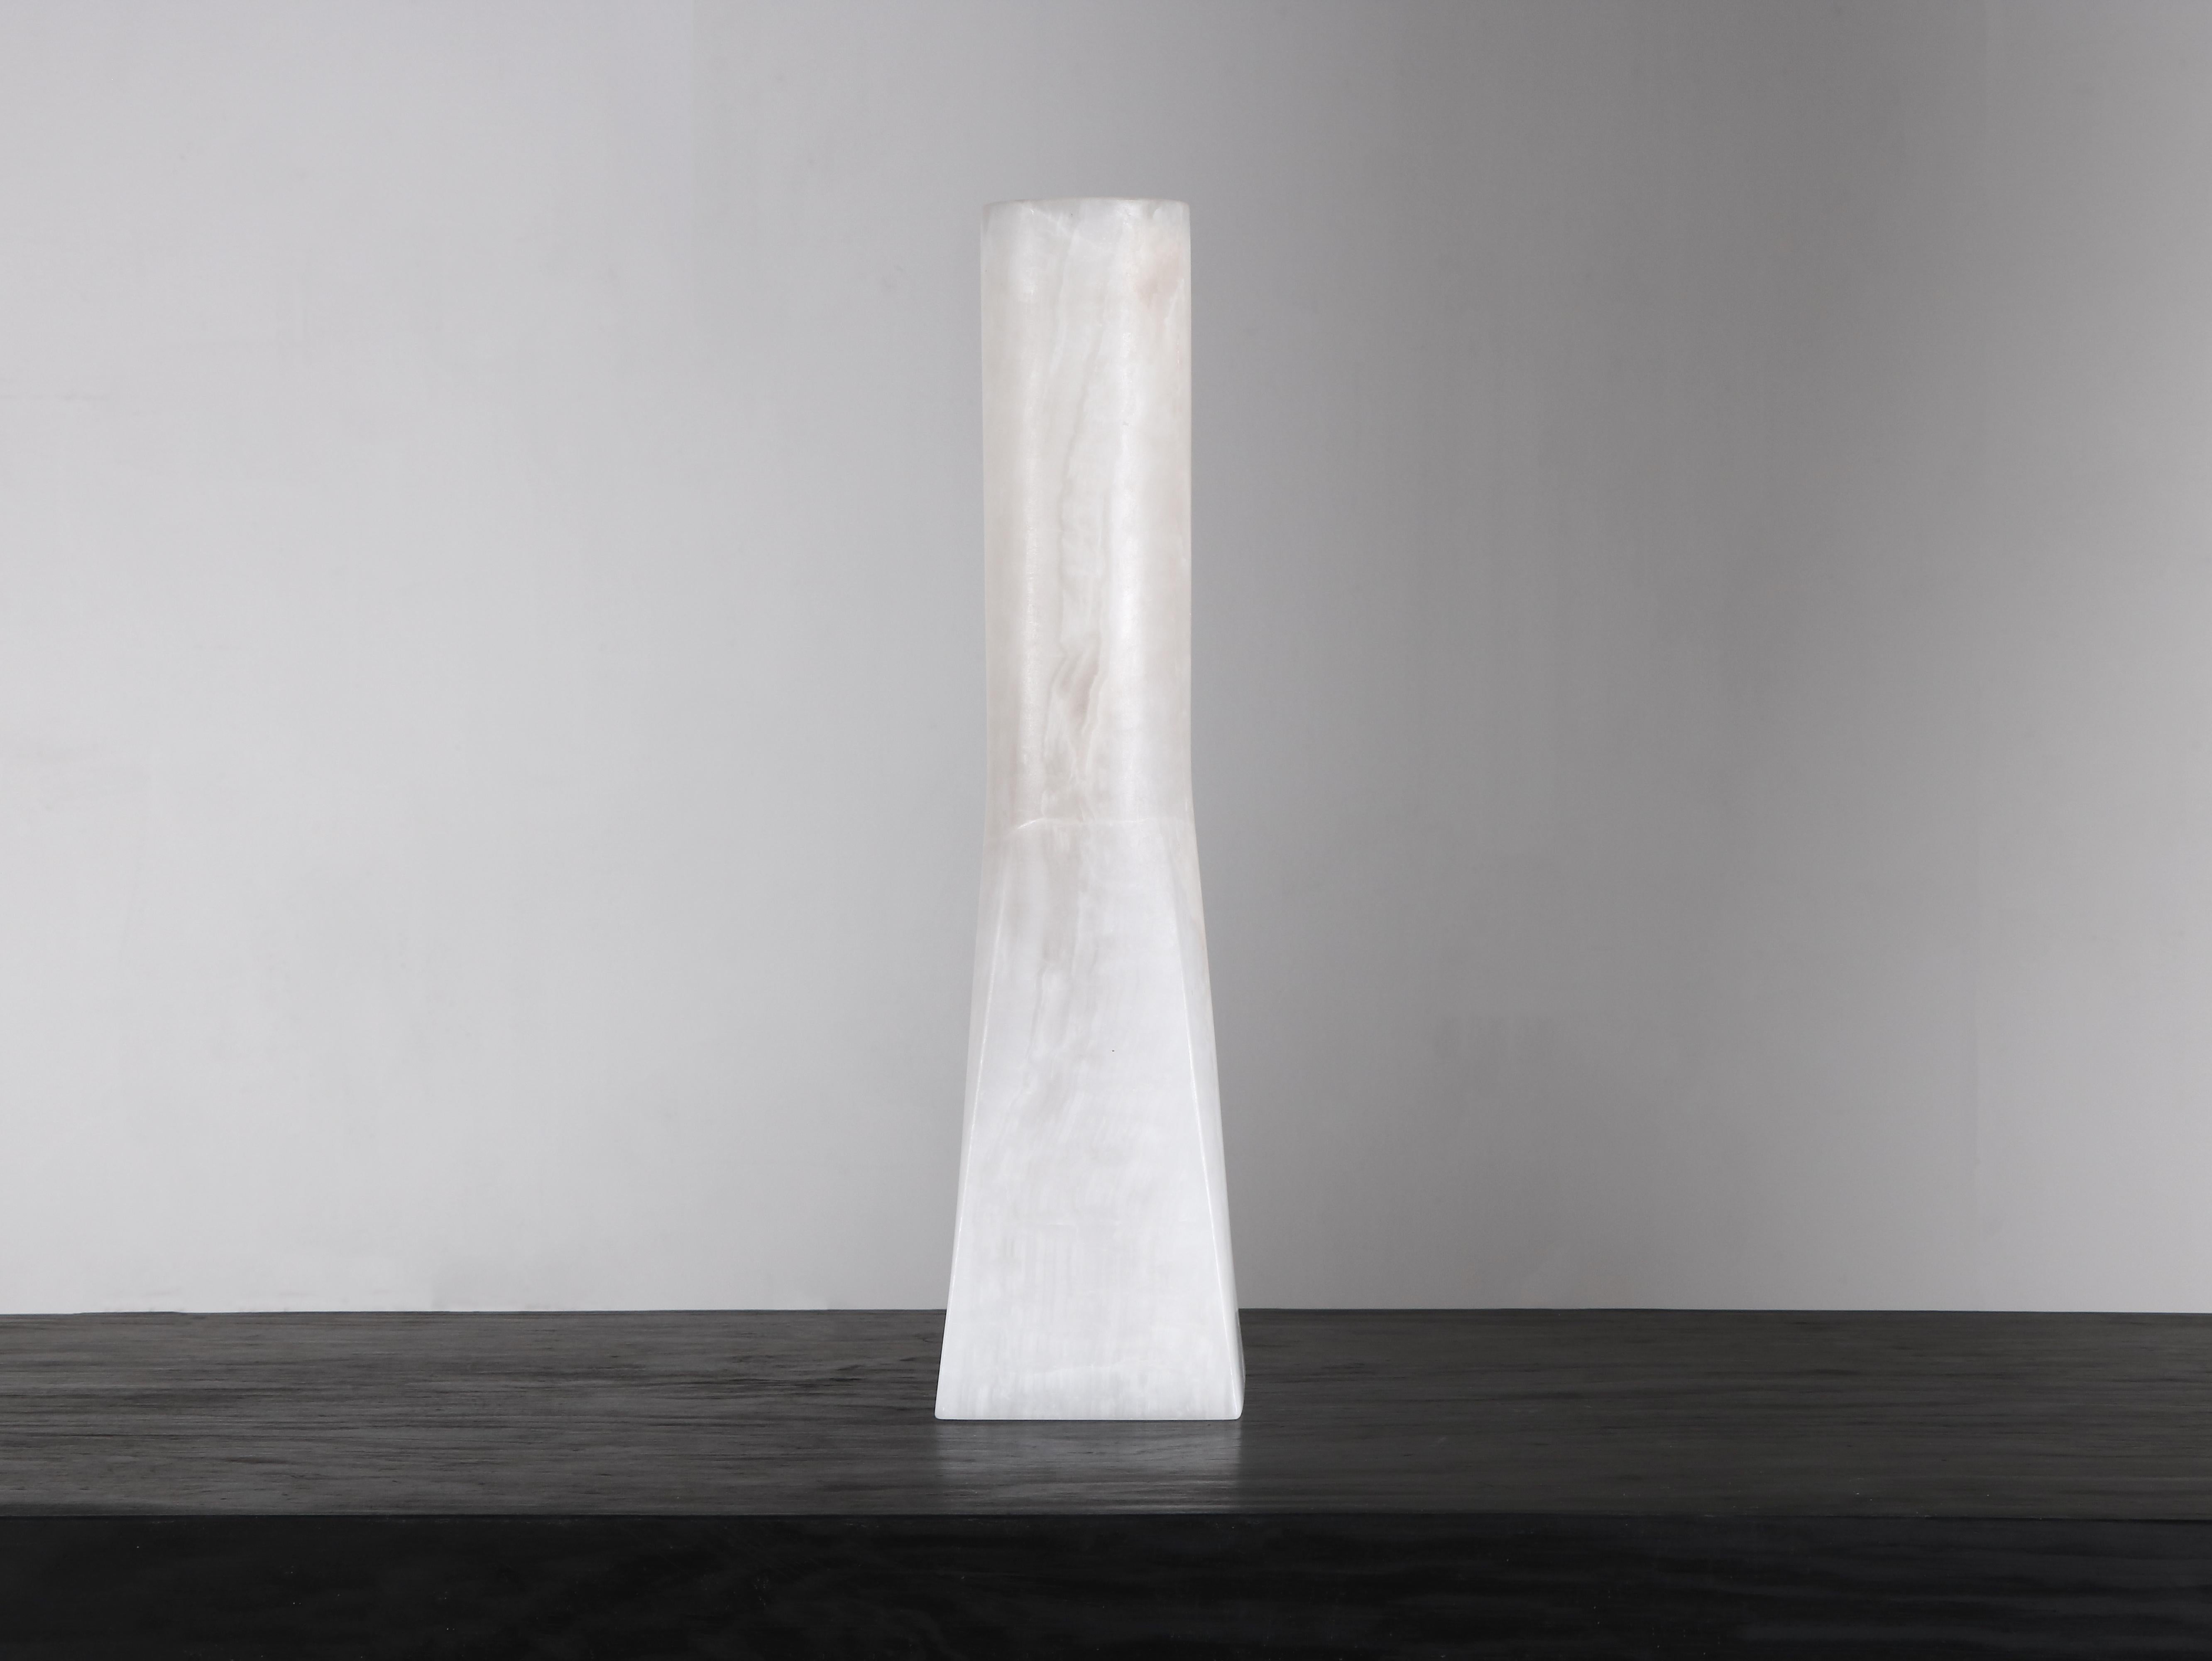 Ruta vase by Lucas Tyra Morten
Limited edition of 10 + 2 AP
Signed
Dimensions: D10 x W19 x H40 cm
Material: Onyx

Objects comes with a 